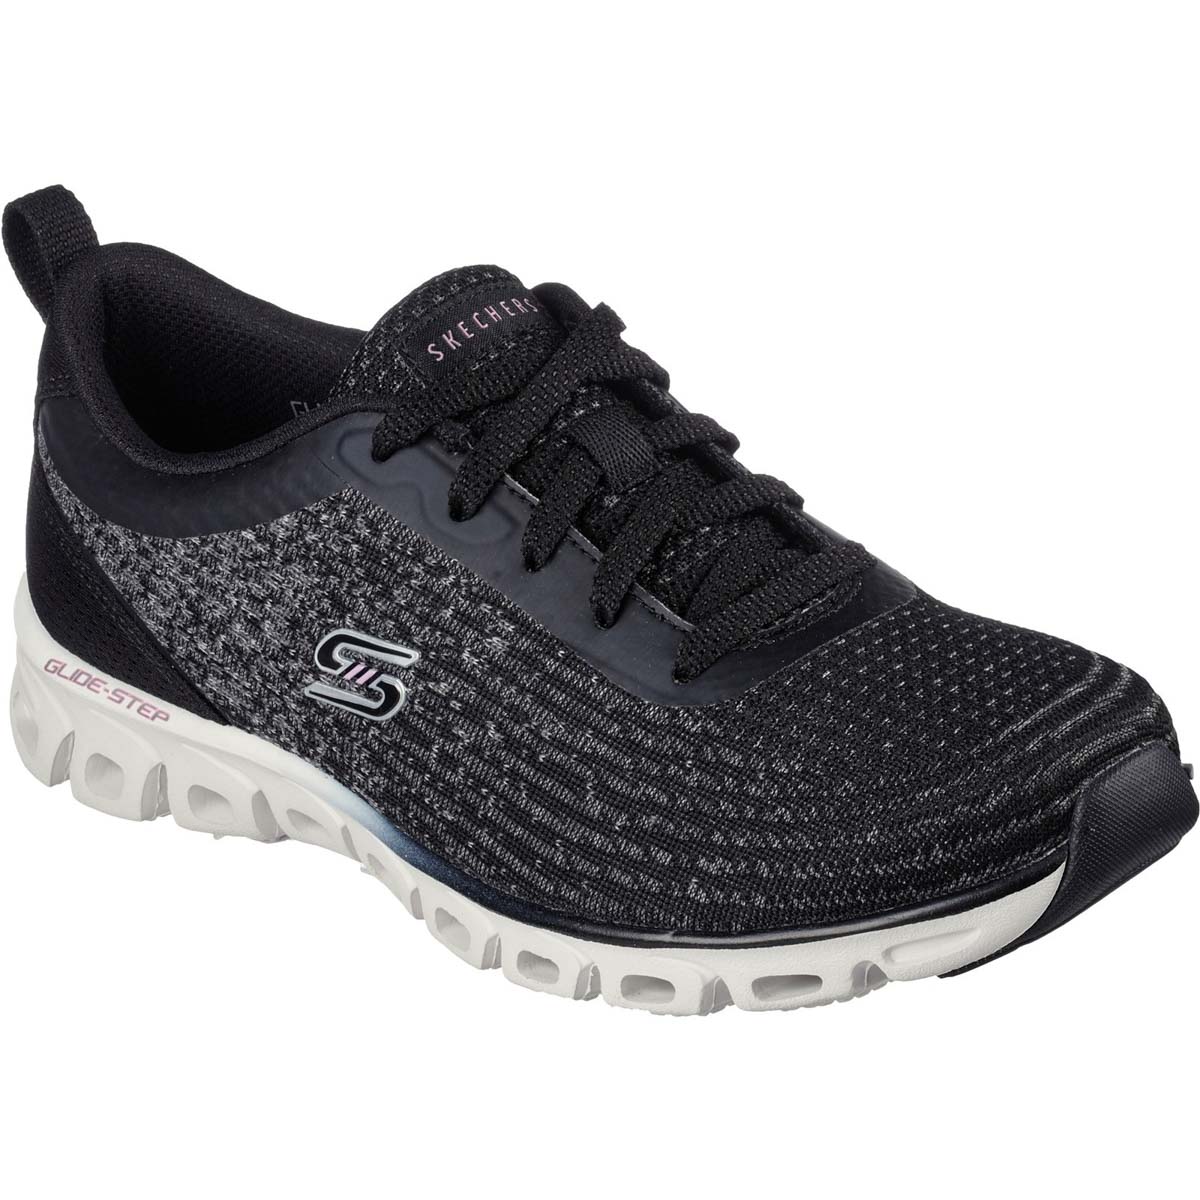 Skechers Glide-step Head Start BKW Black white Womens trainers in a Plain Textile in Size 4